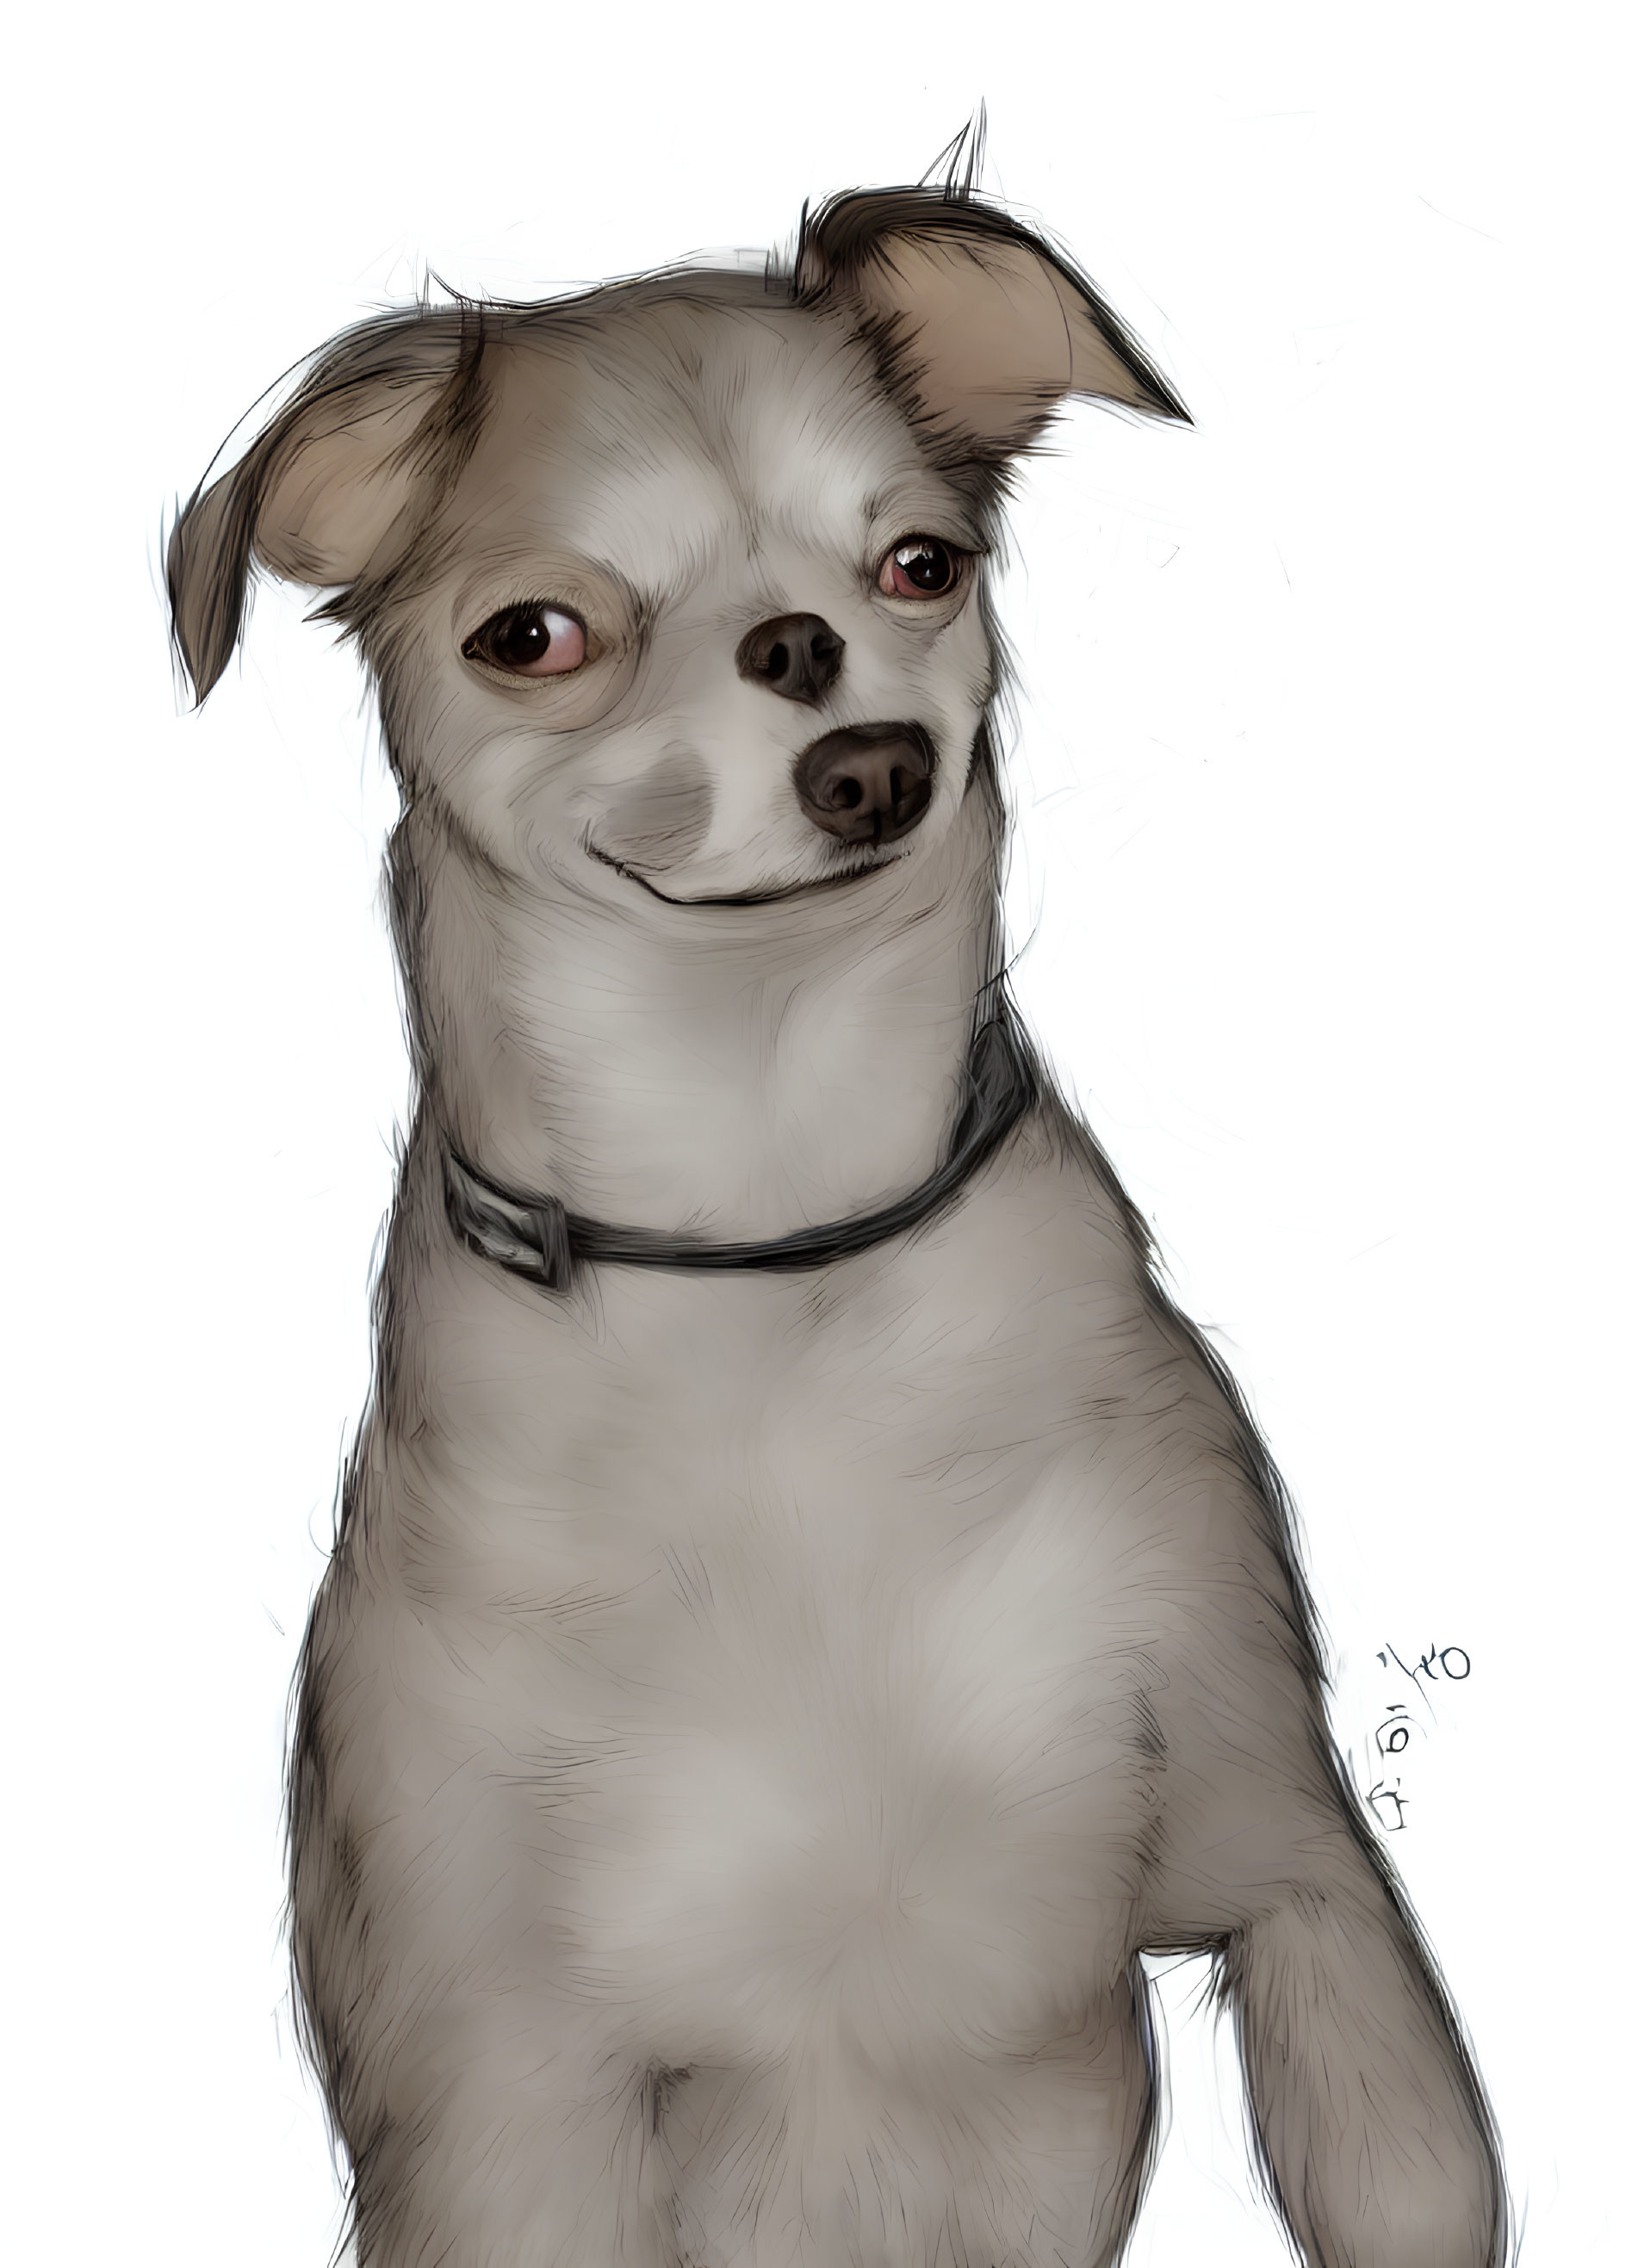 Tan and White Chihuahua Illustration with Black Collar and Sideways Glance